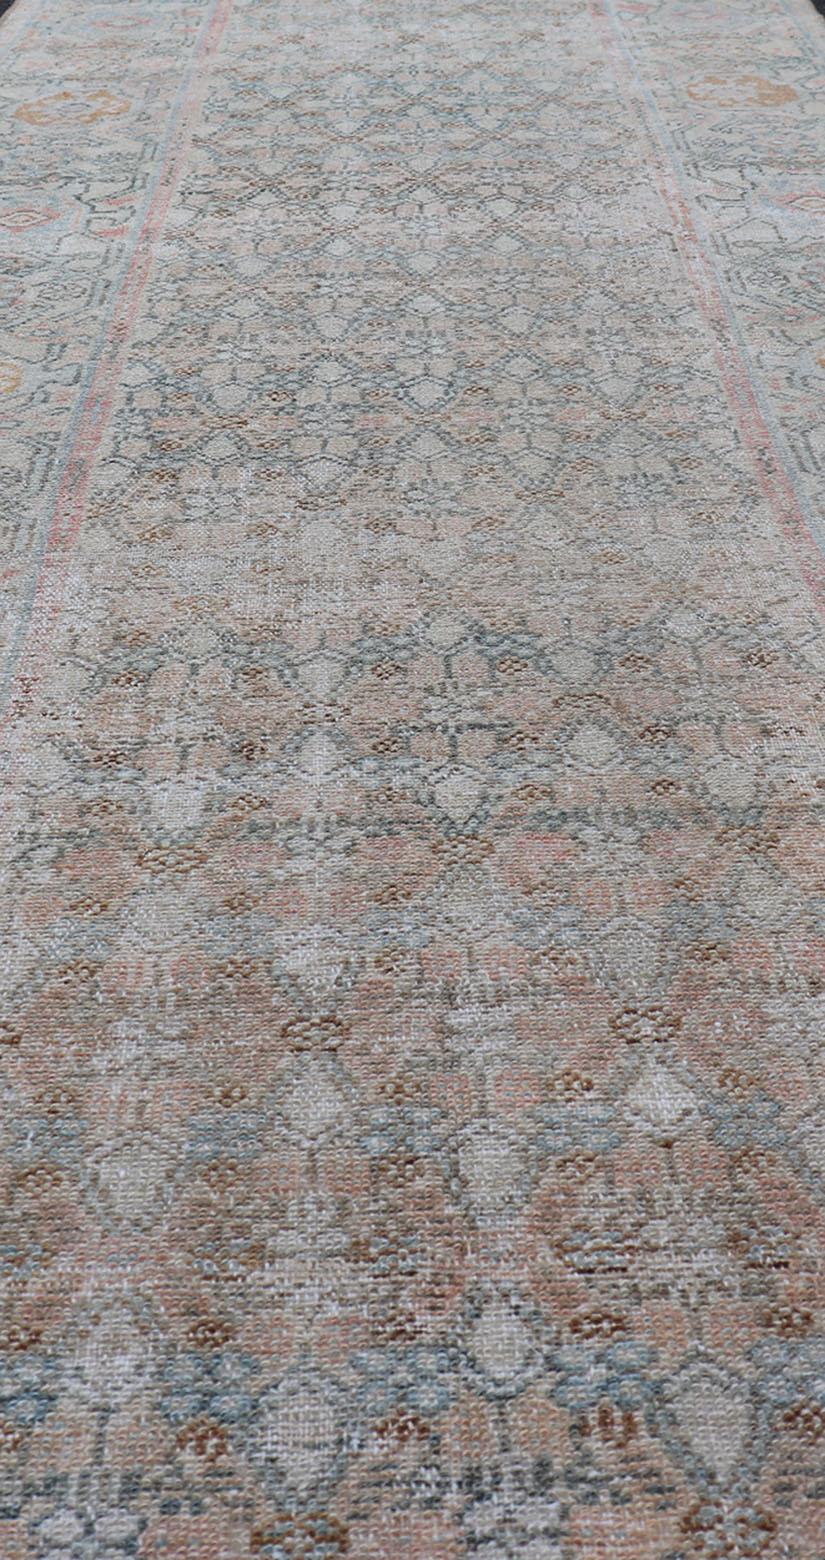 Fine Persian Malayer Runner in Soft Tones of Blue, Salmon, Pink, Peach & Orange For Sale 4